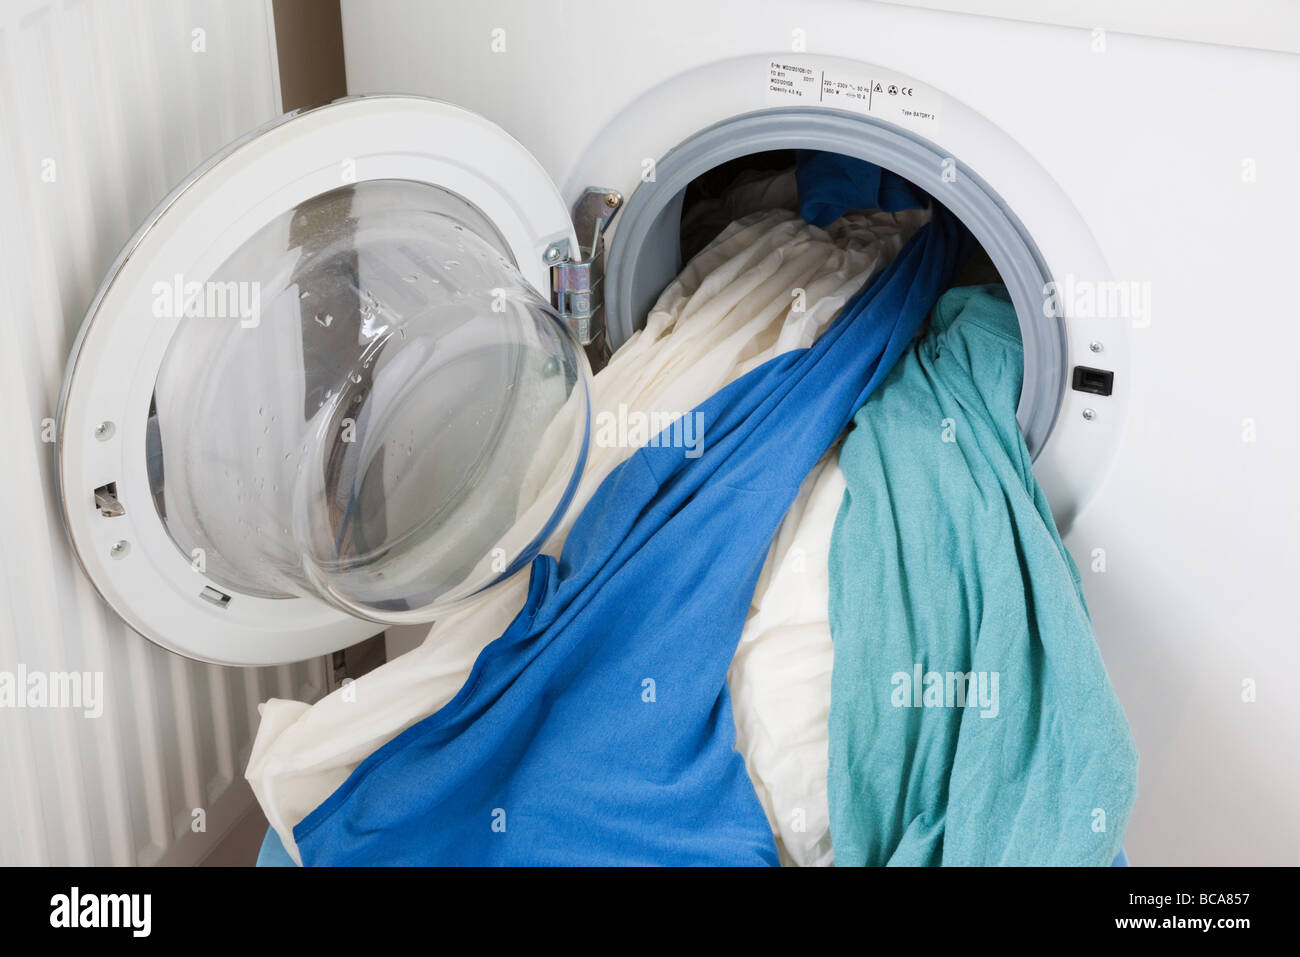 How To Clean Your Washer